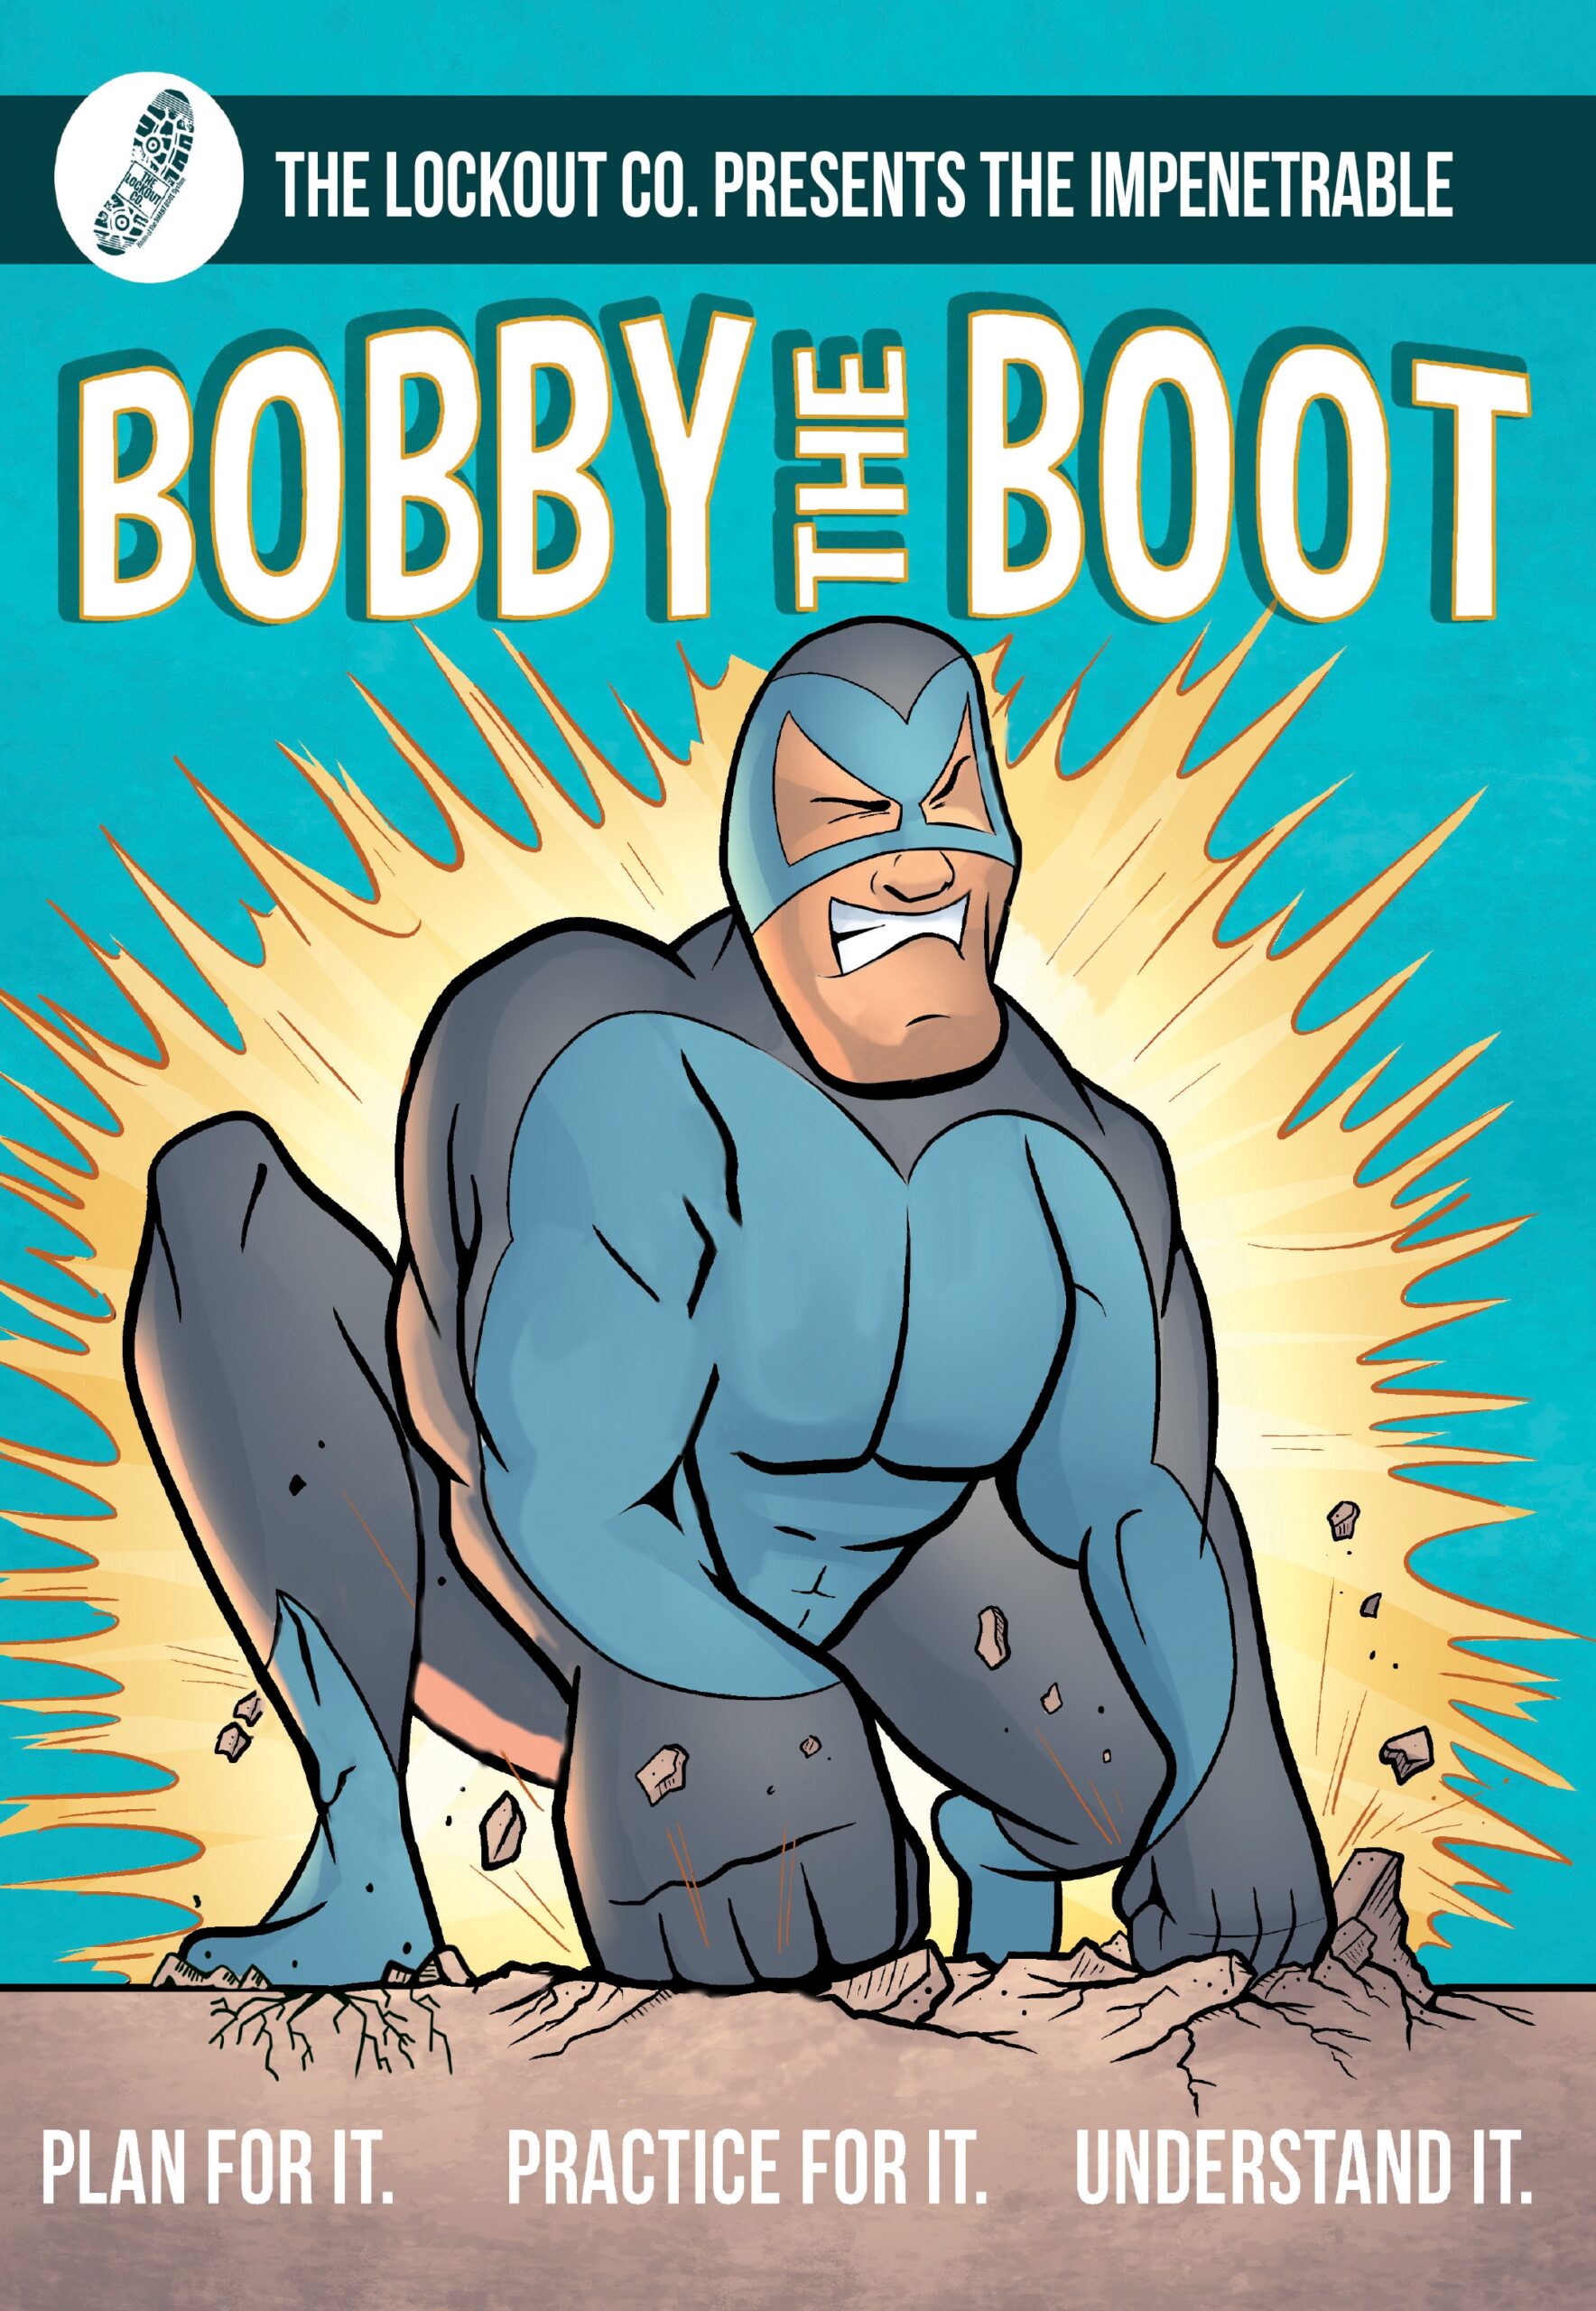 Comic book cover of Bobby The Boot. Classroom hero Bobby The Boot centered on the page above the phrases, "plan for it, practice for it, and understand it."